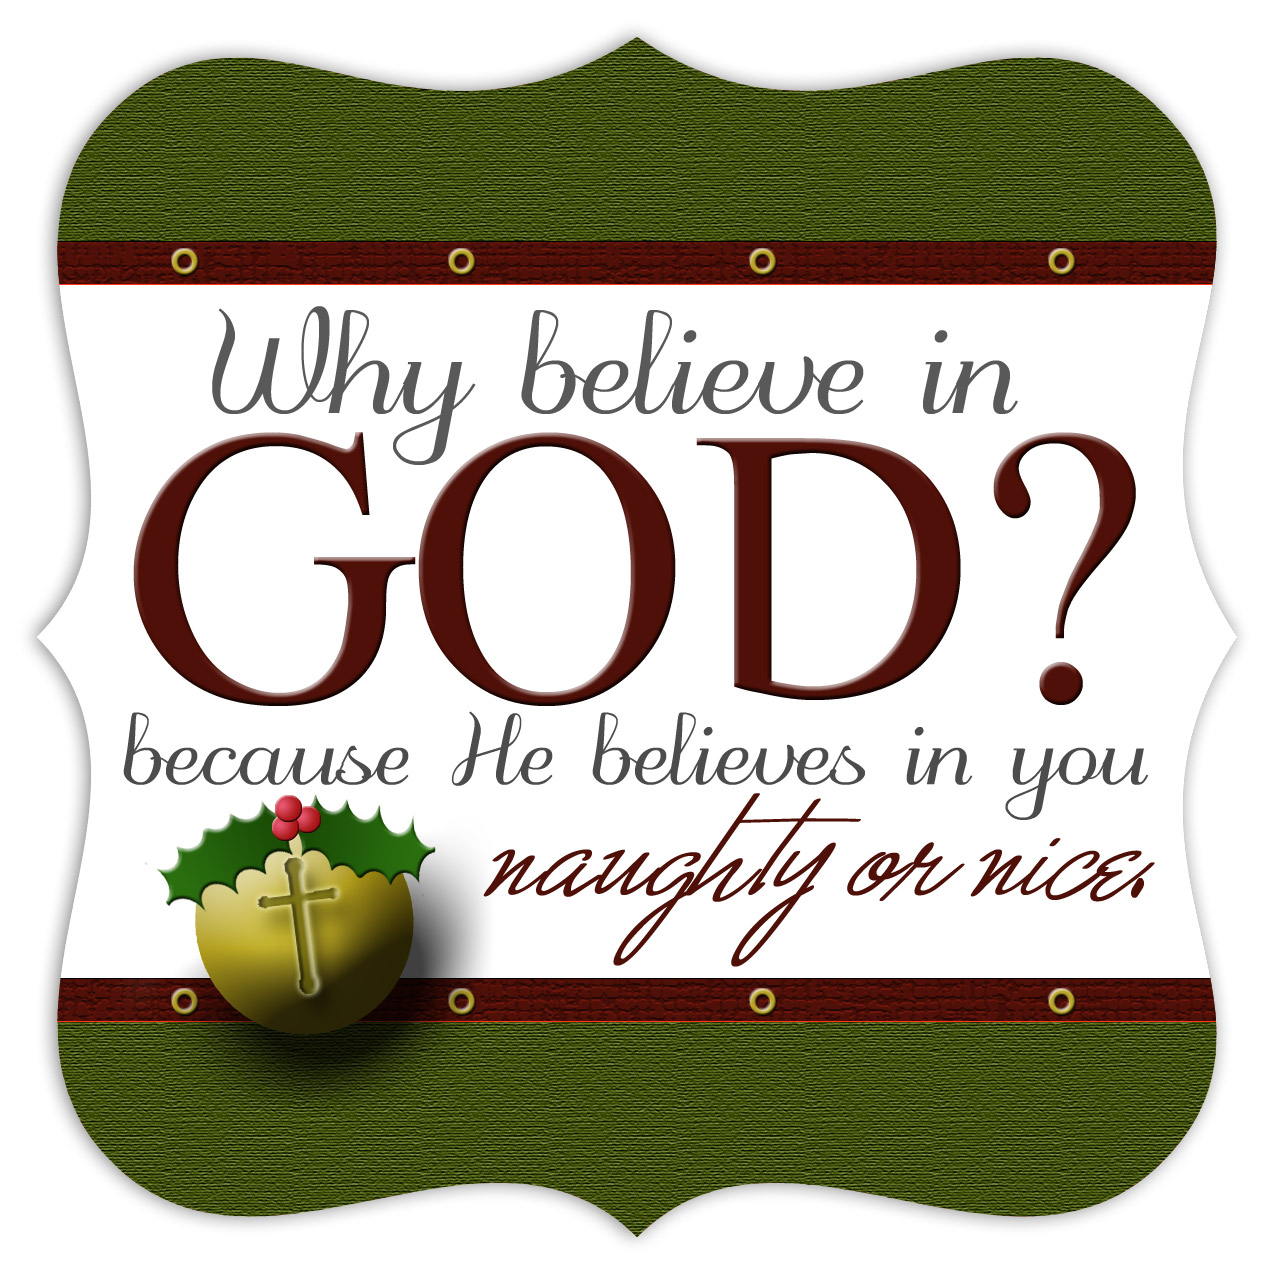 why you believe in God?